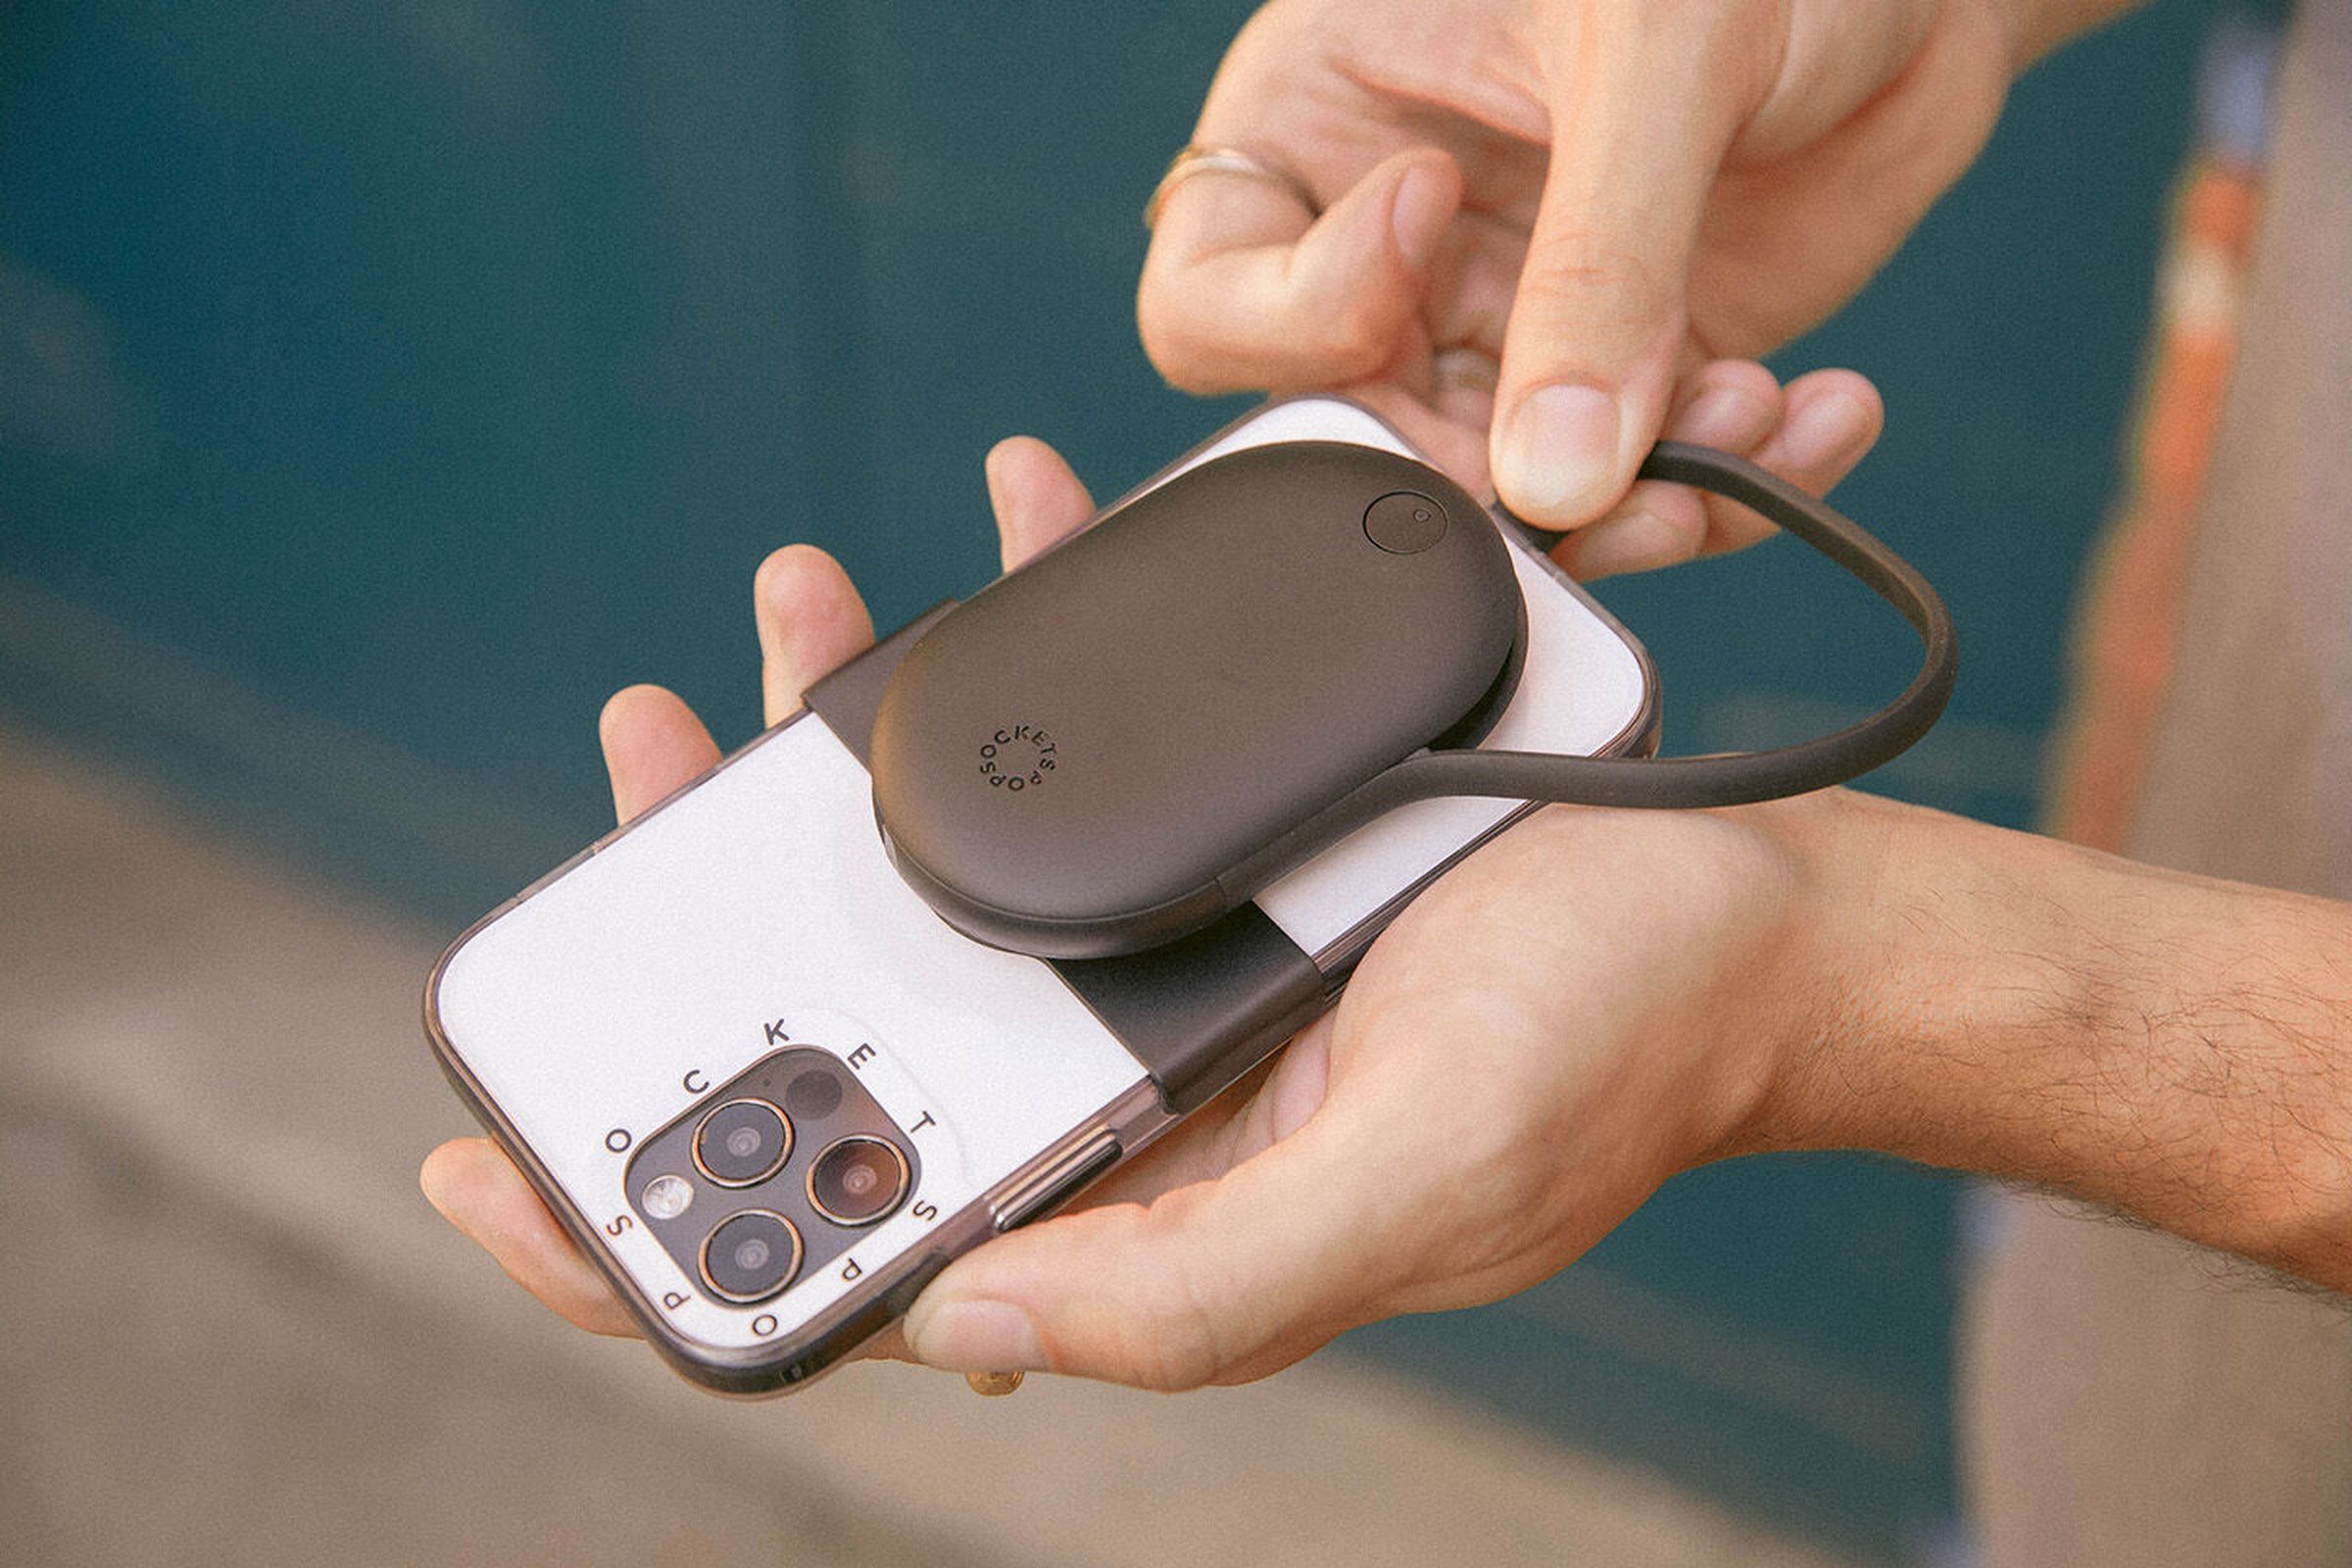 Image of a PopGrip JumpStart being used to charge an iPhone.